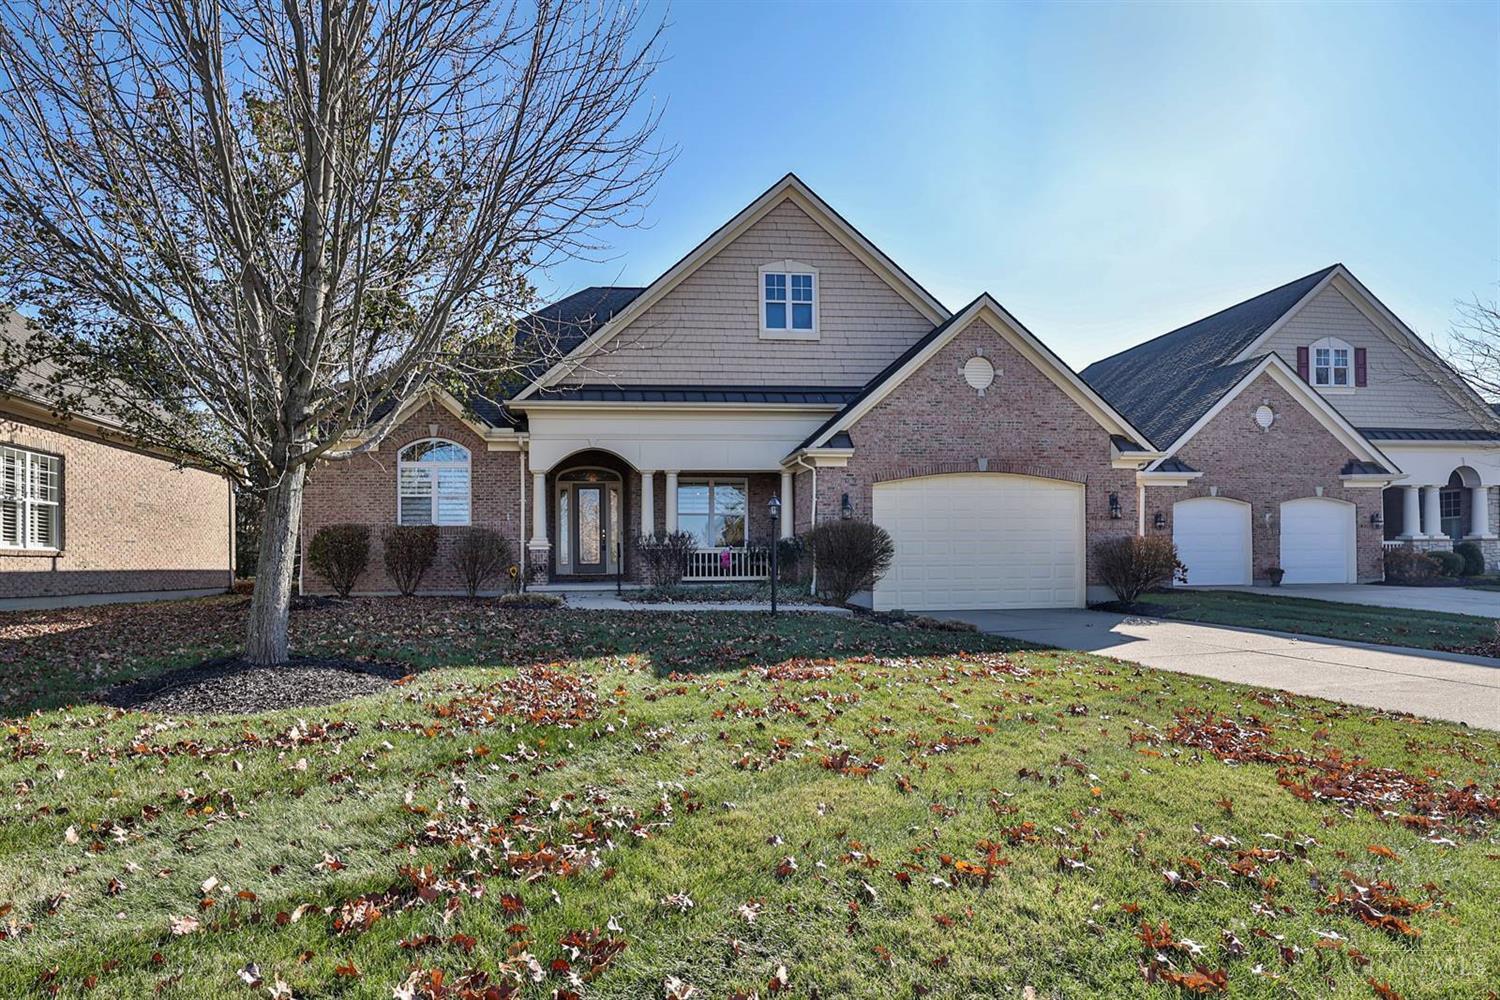 890 Old Course Ln, Pierce Twp, OH 